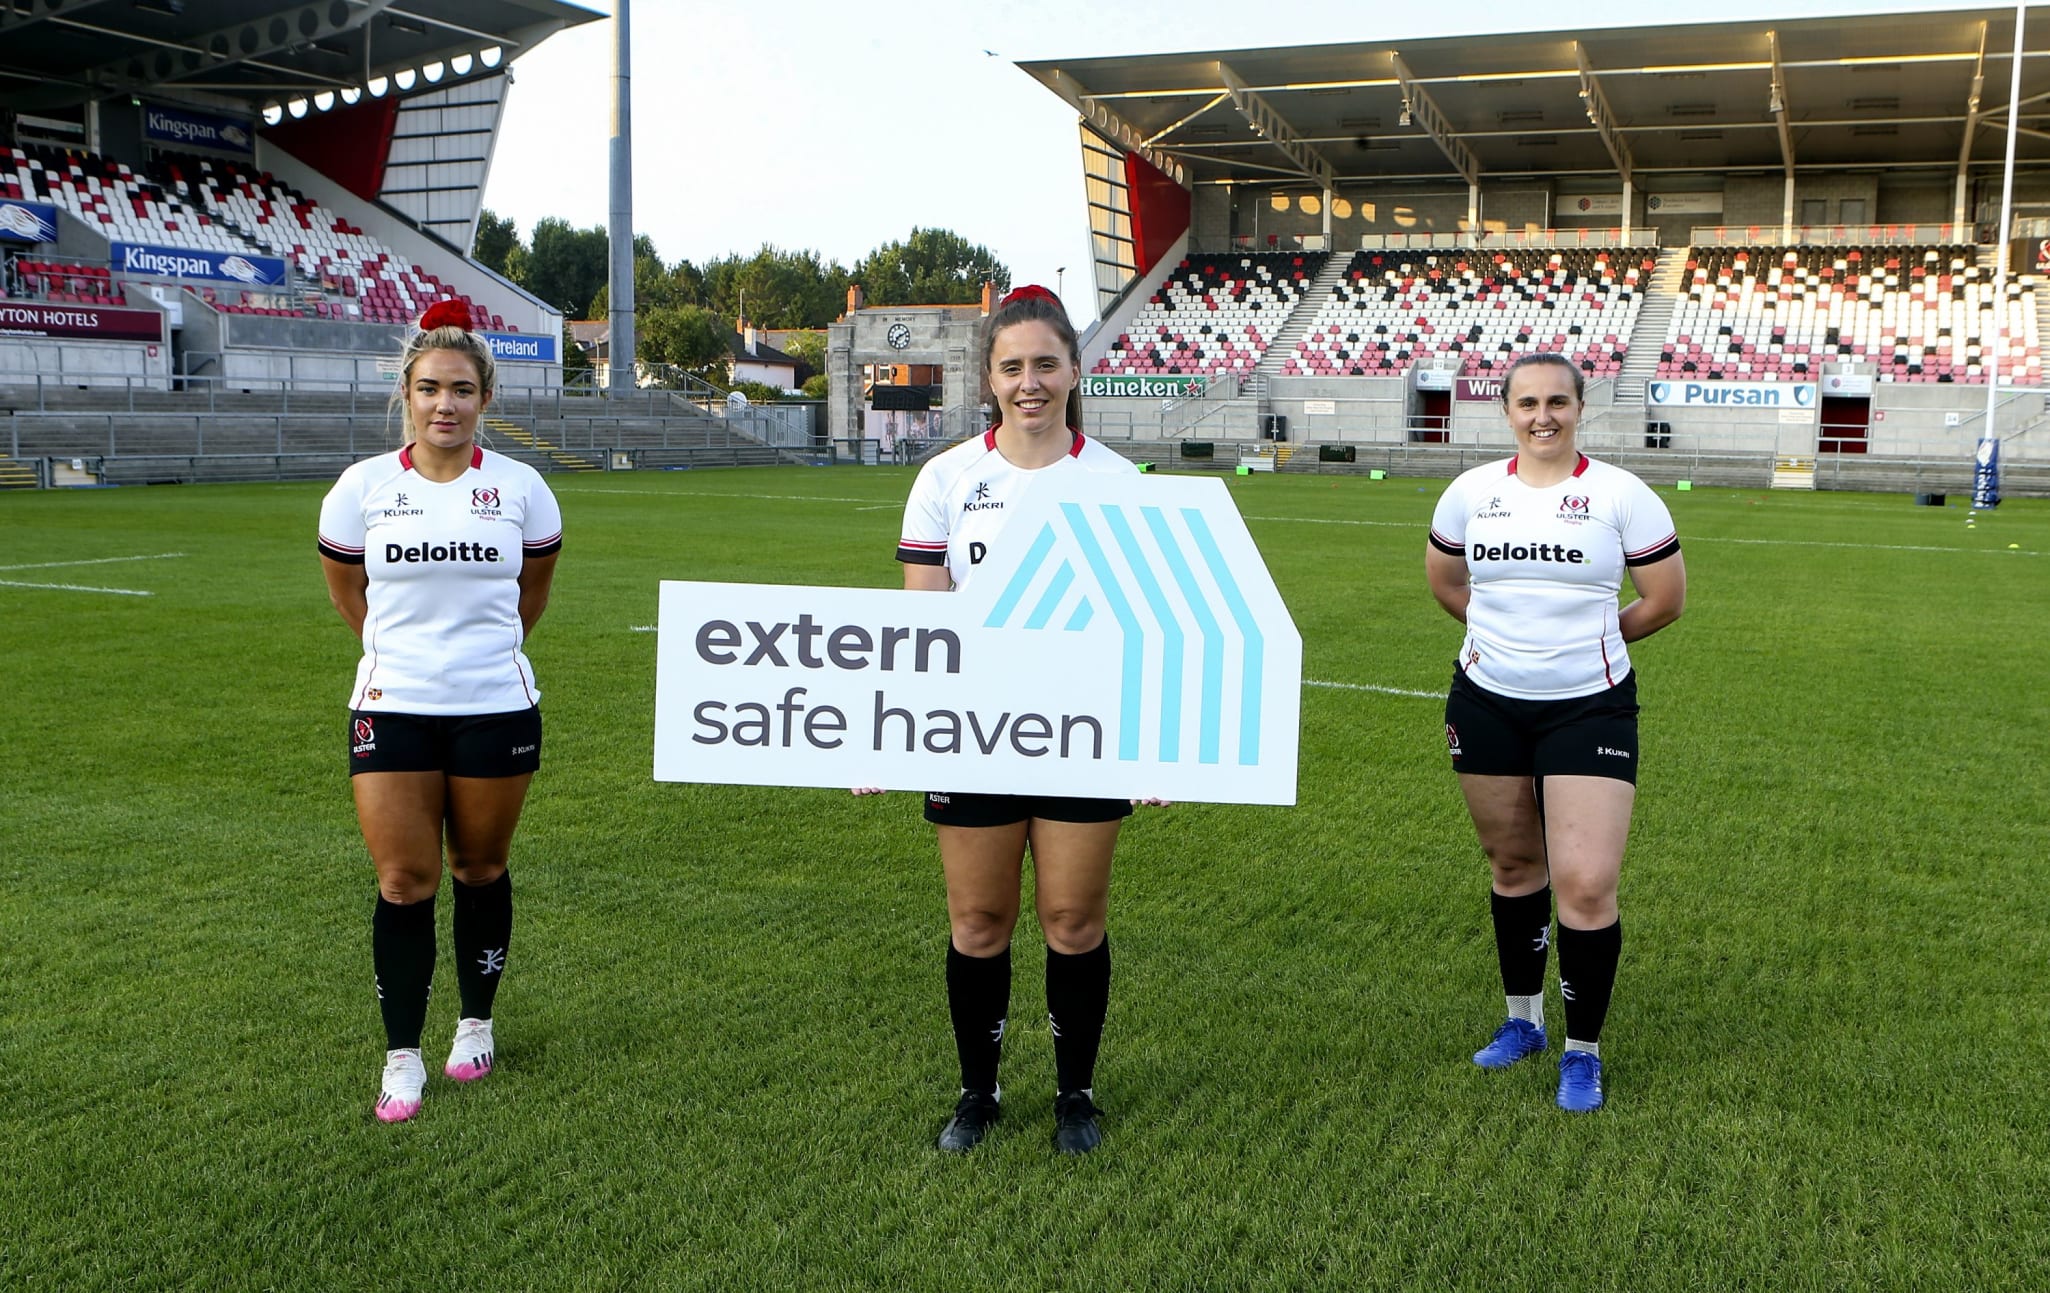 Ulster Rugby senior woman support the Extern launch